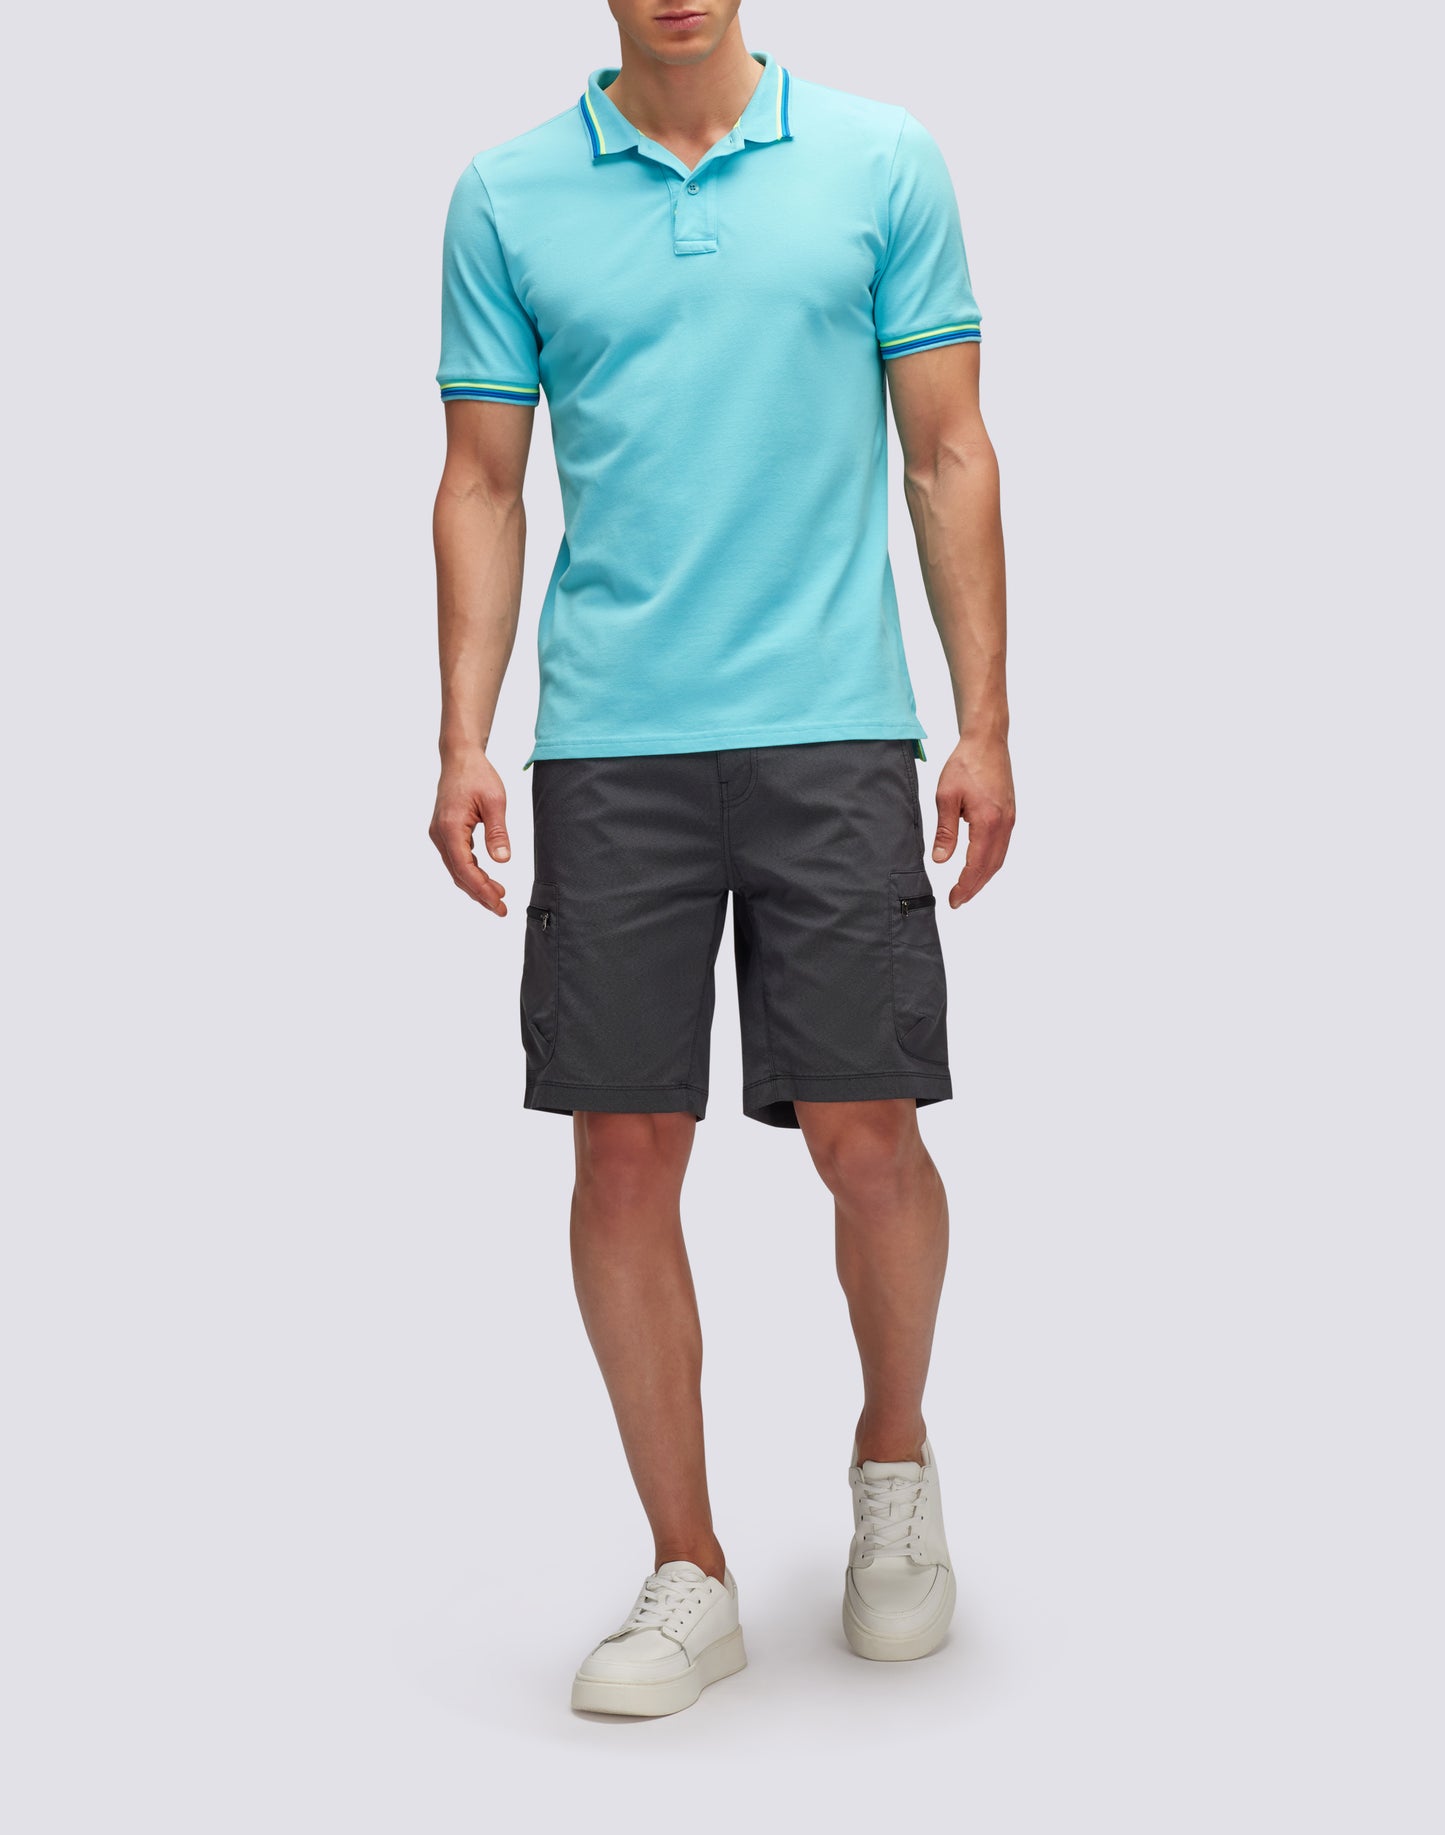 BRICE POLO SHIRT IN PIQUET COTTON WITH TRICOLOR DETAILS